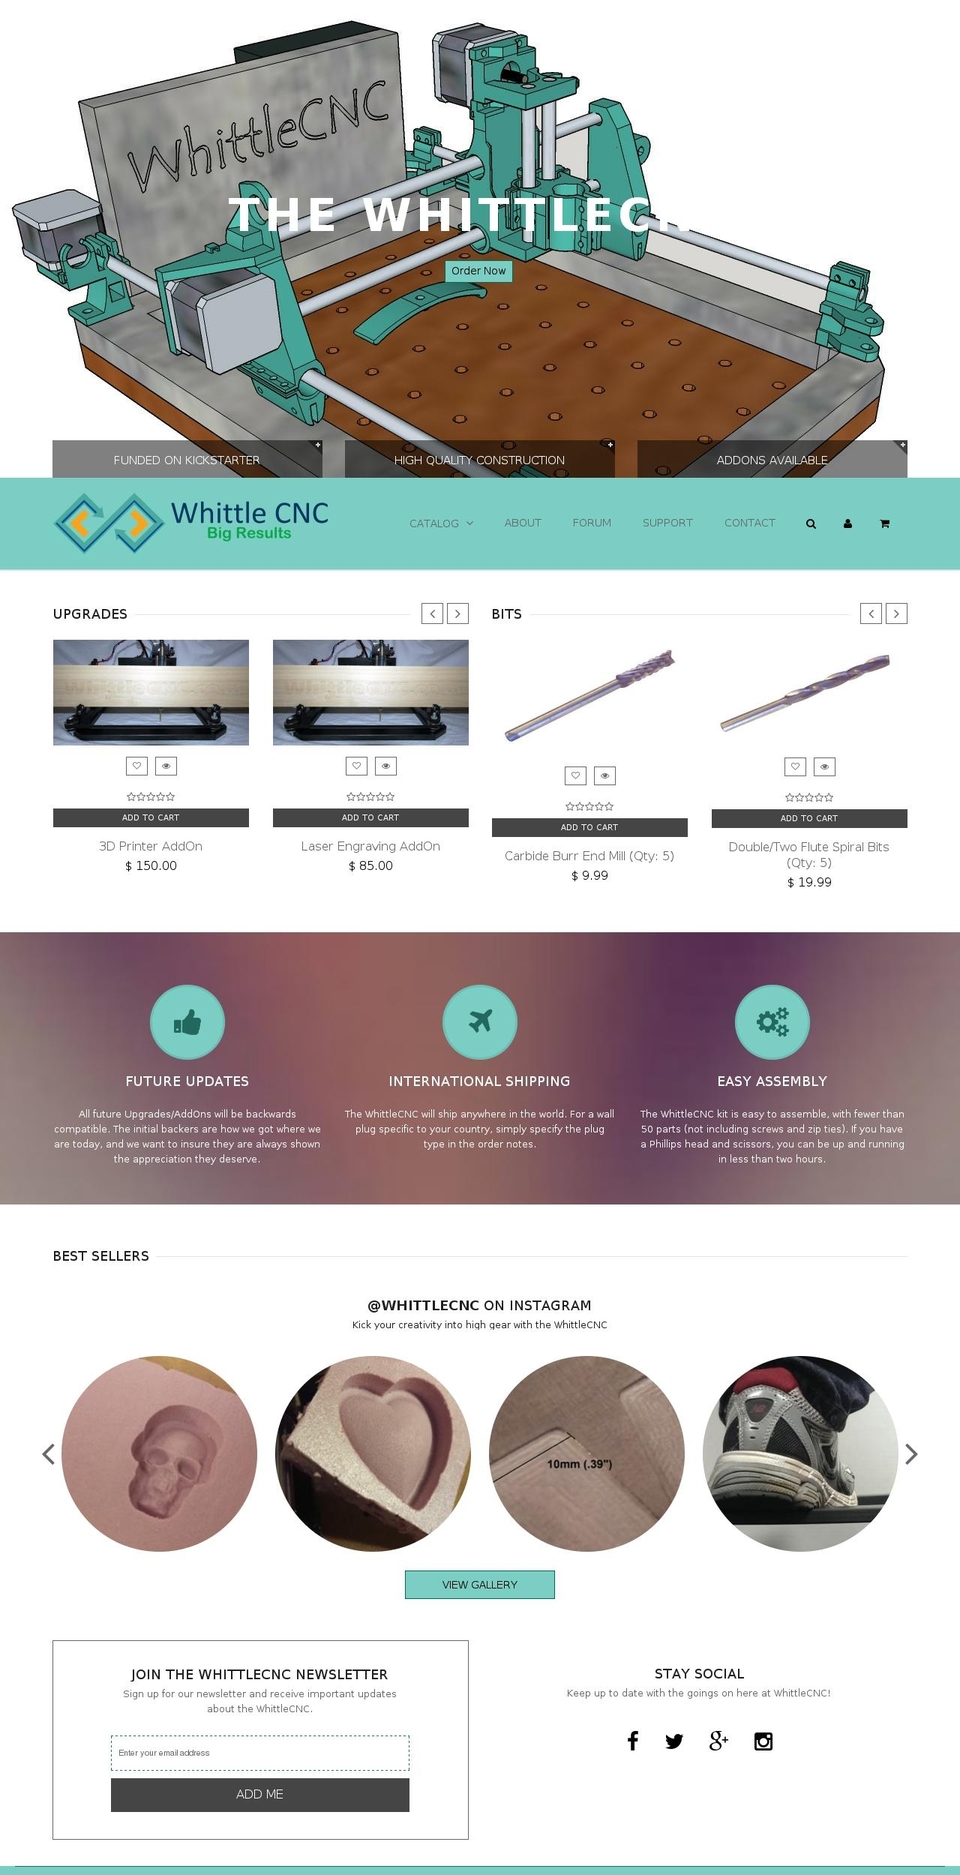 QUEEN Shopify theme site example whittlecnc.com